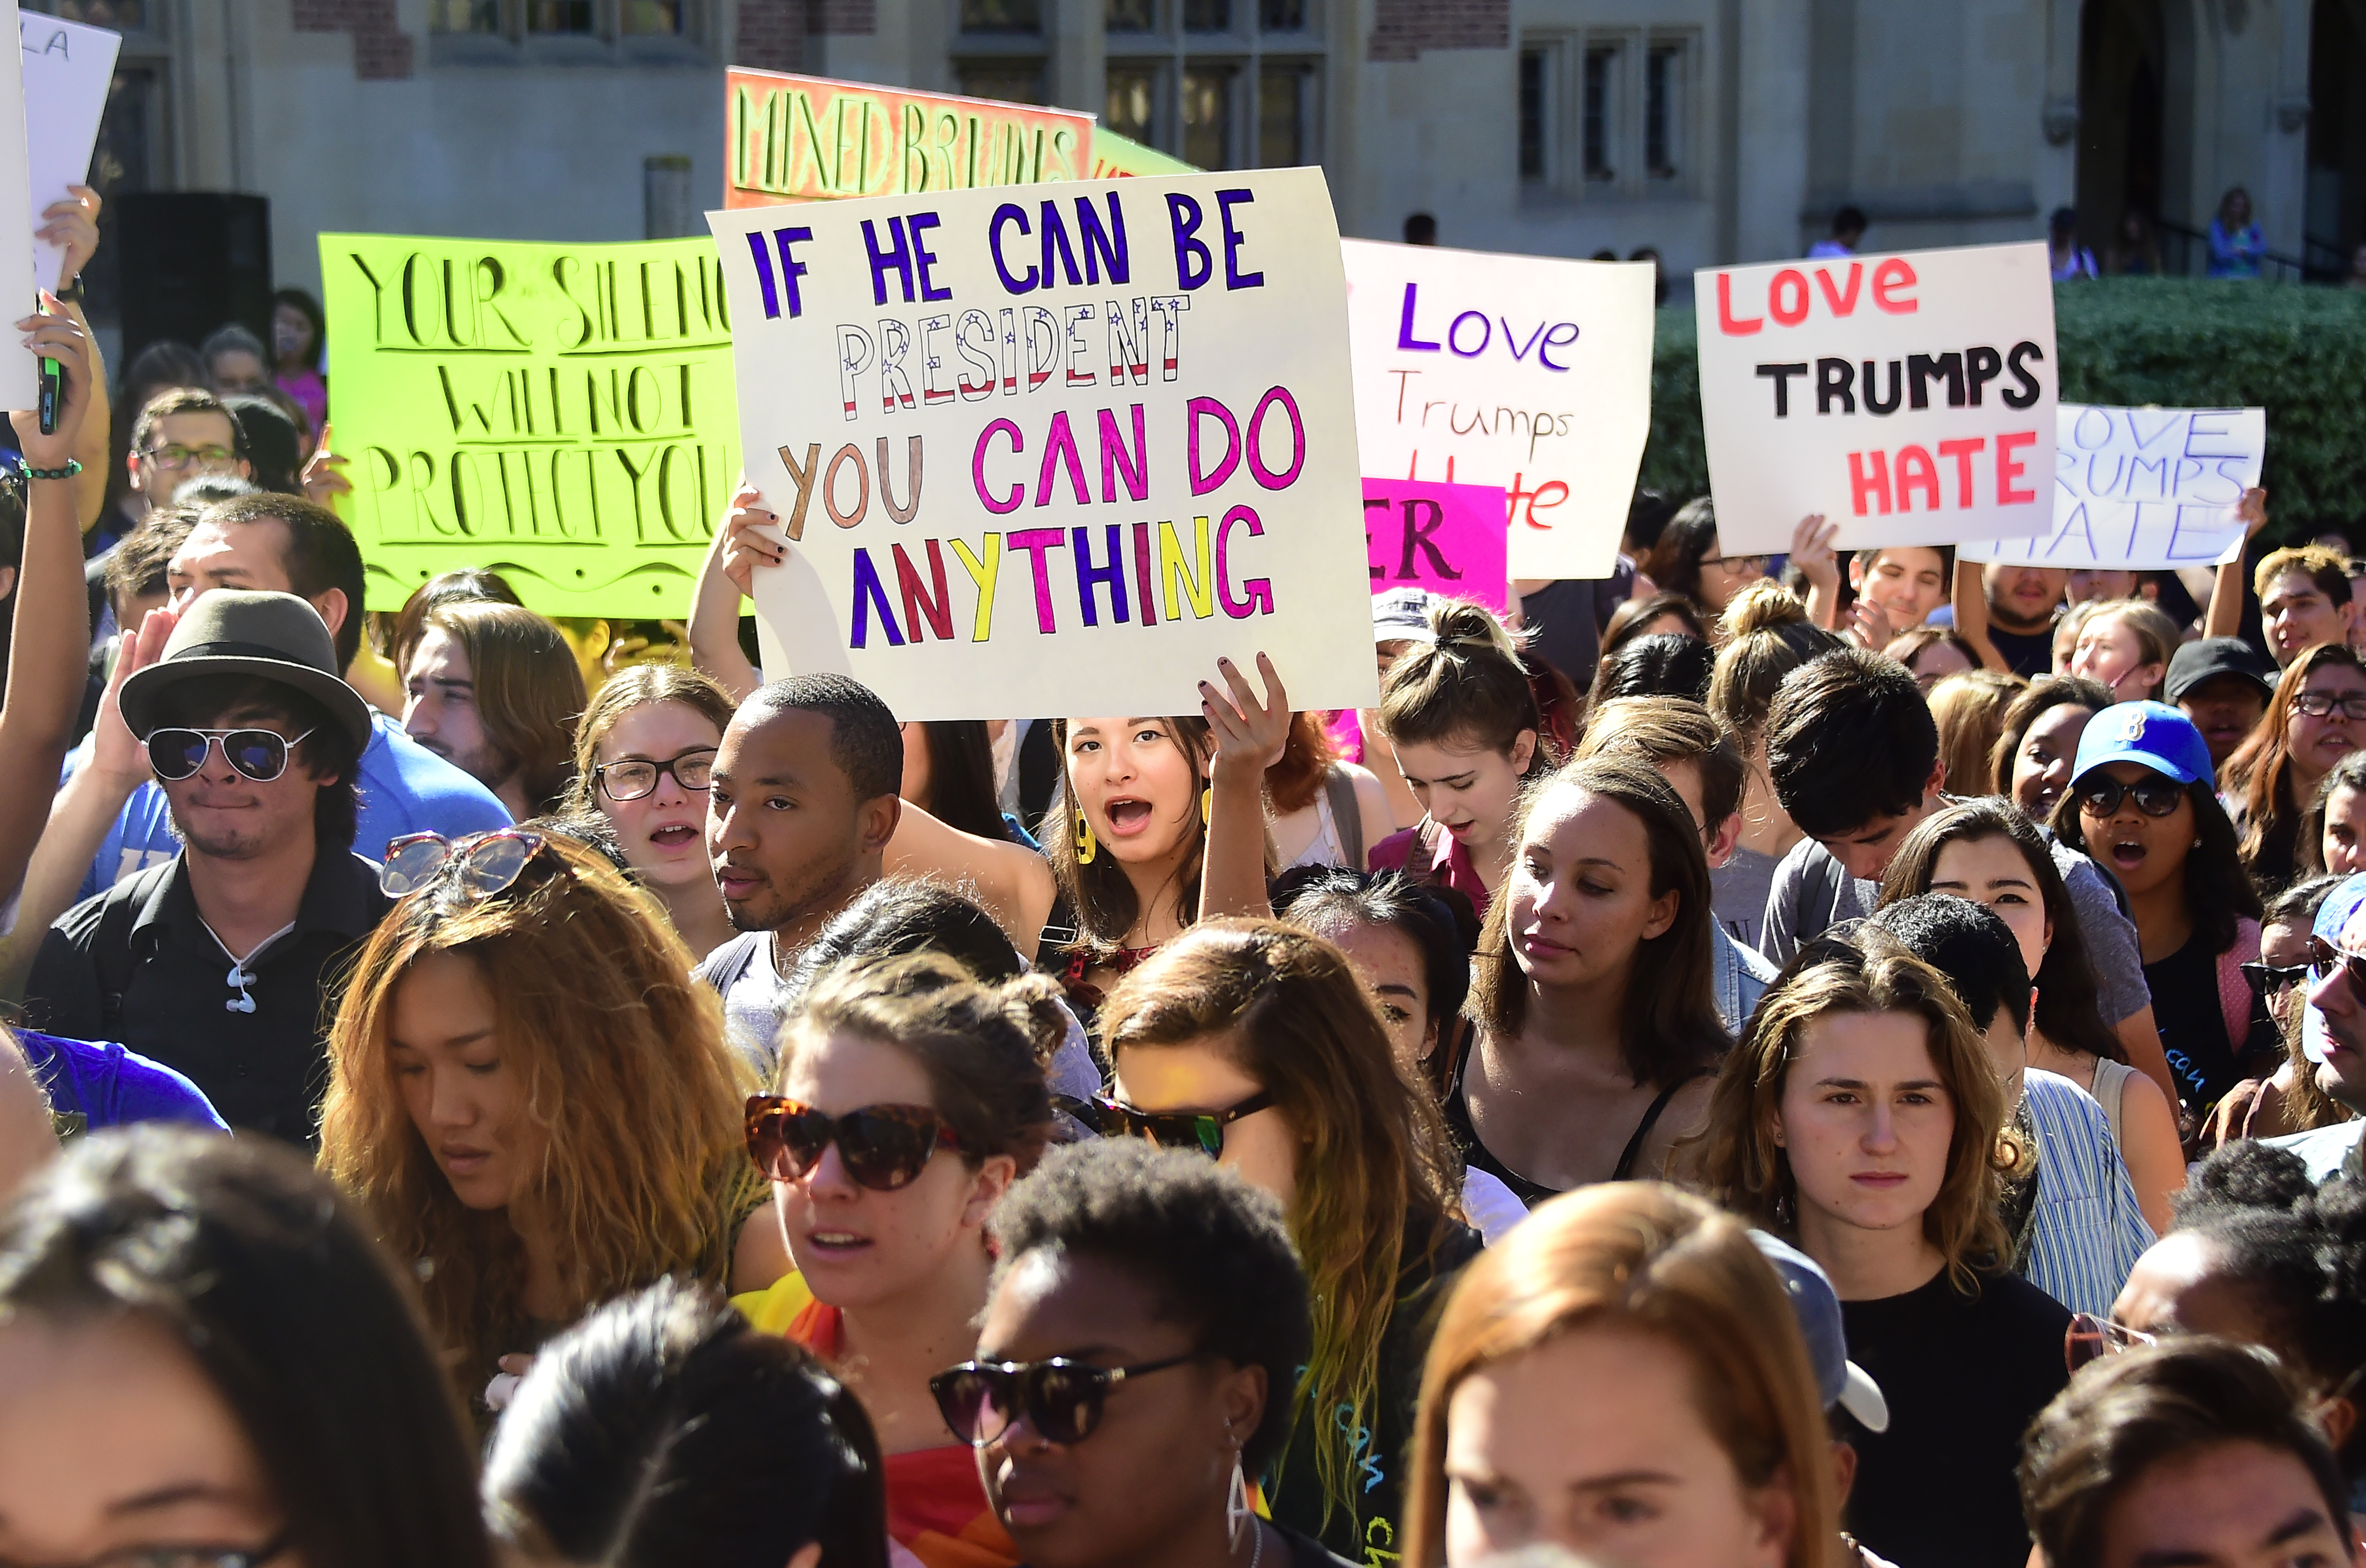 University of California Loas Angeles students march through campus on November 10, 2016 in Los Angeles, California, during a "Love Trumps Hate" rally in reaction to President-elect Donald Trump's victory in the presidential elections. / AFP PHOTO